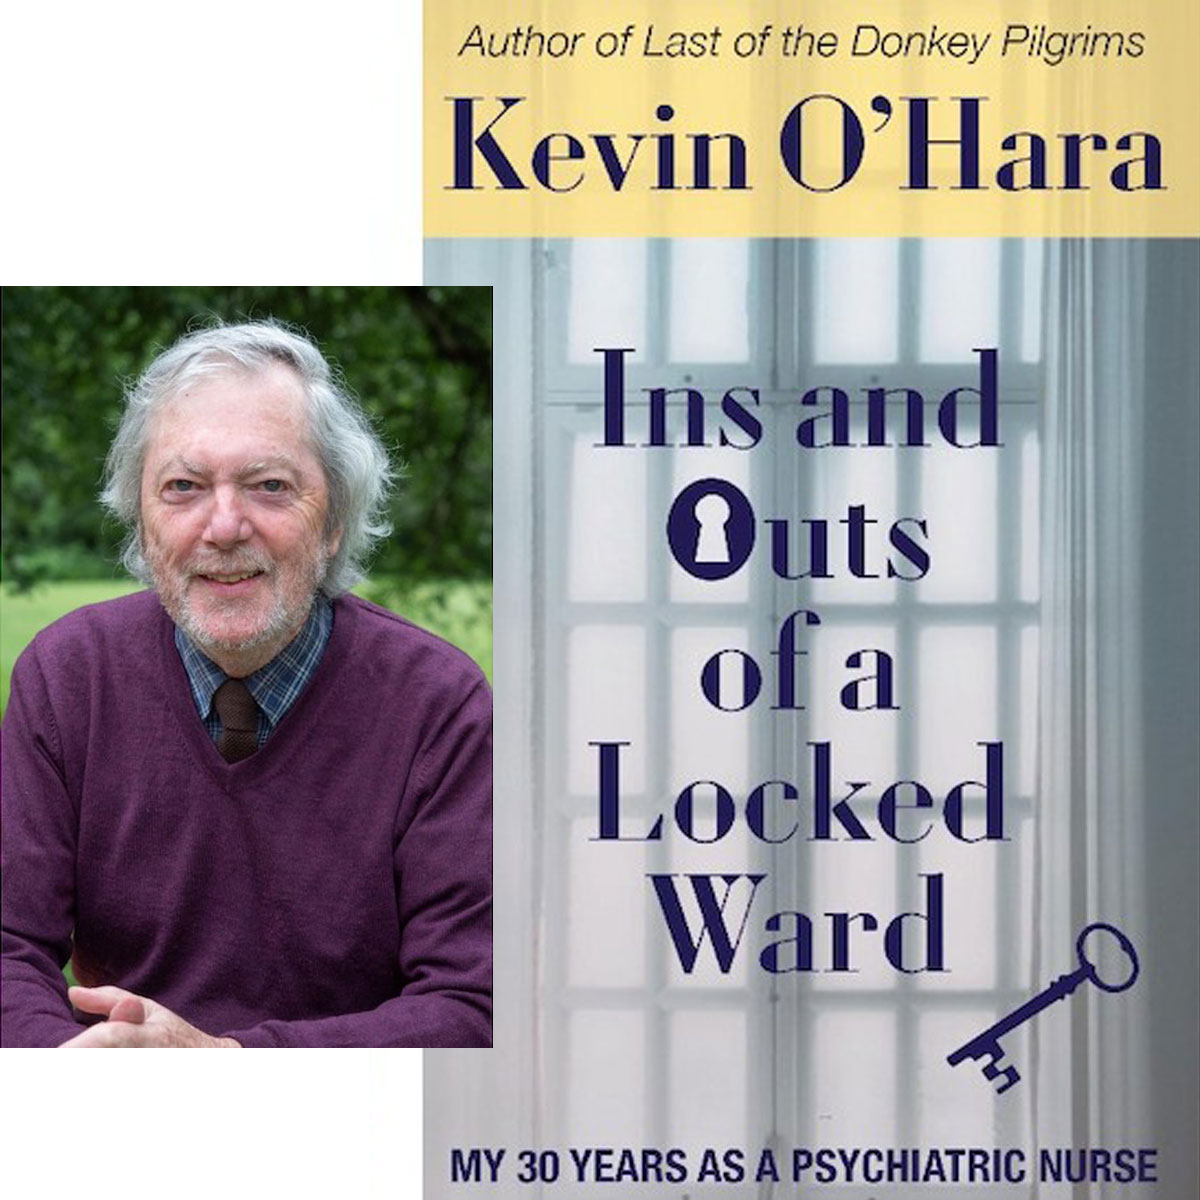 Book cover of "Ins and Outs of a Locked Ward" and a photo of the author Kevin O'Hara